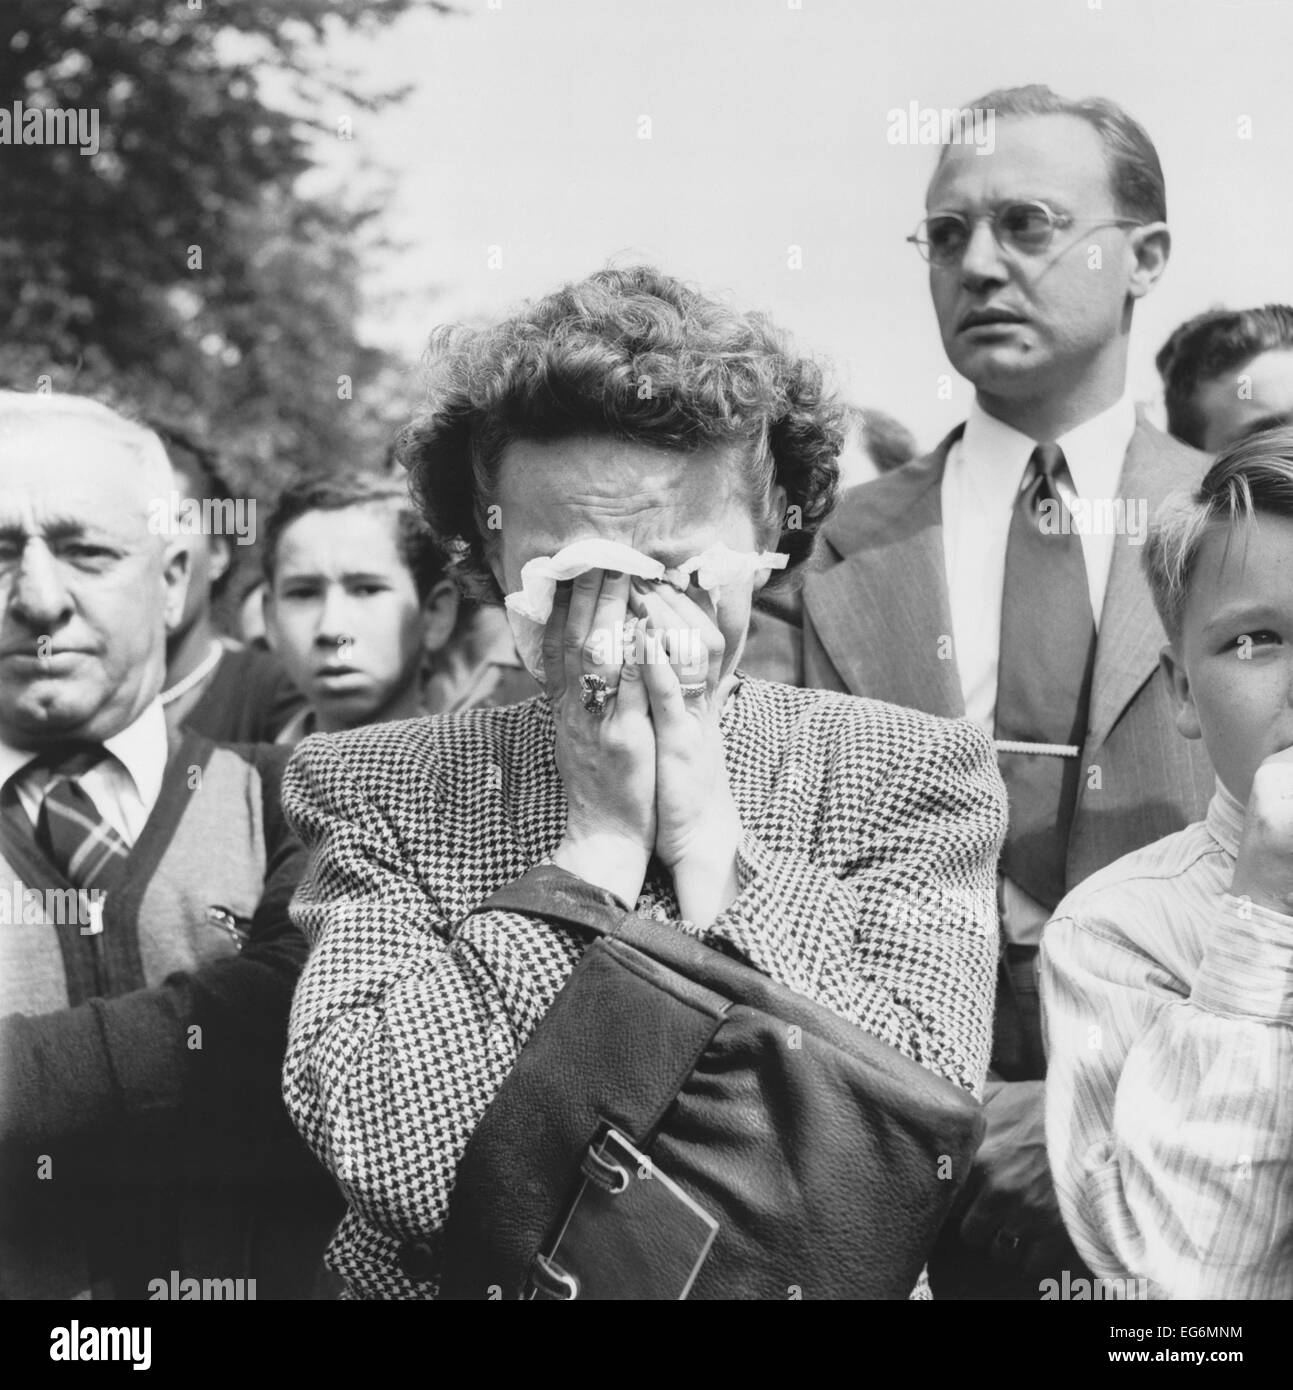 Woman weeps into her handkerchief at the funeral of President Franklin Roosevelt. Washington, D.C. April 14, 1945. World War 2. Stock Photo